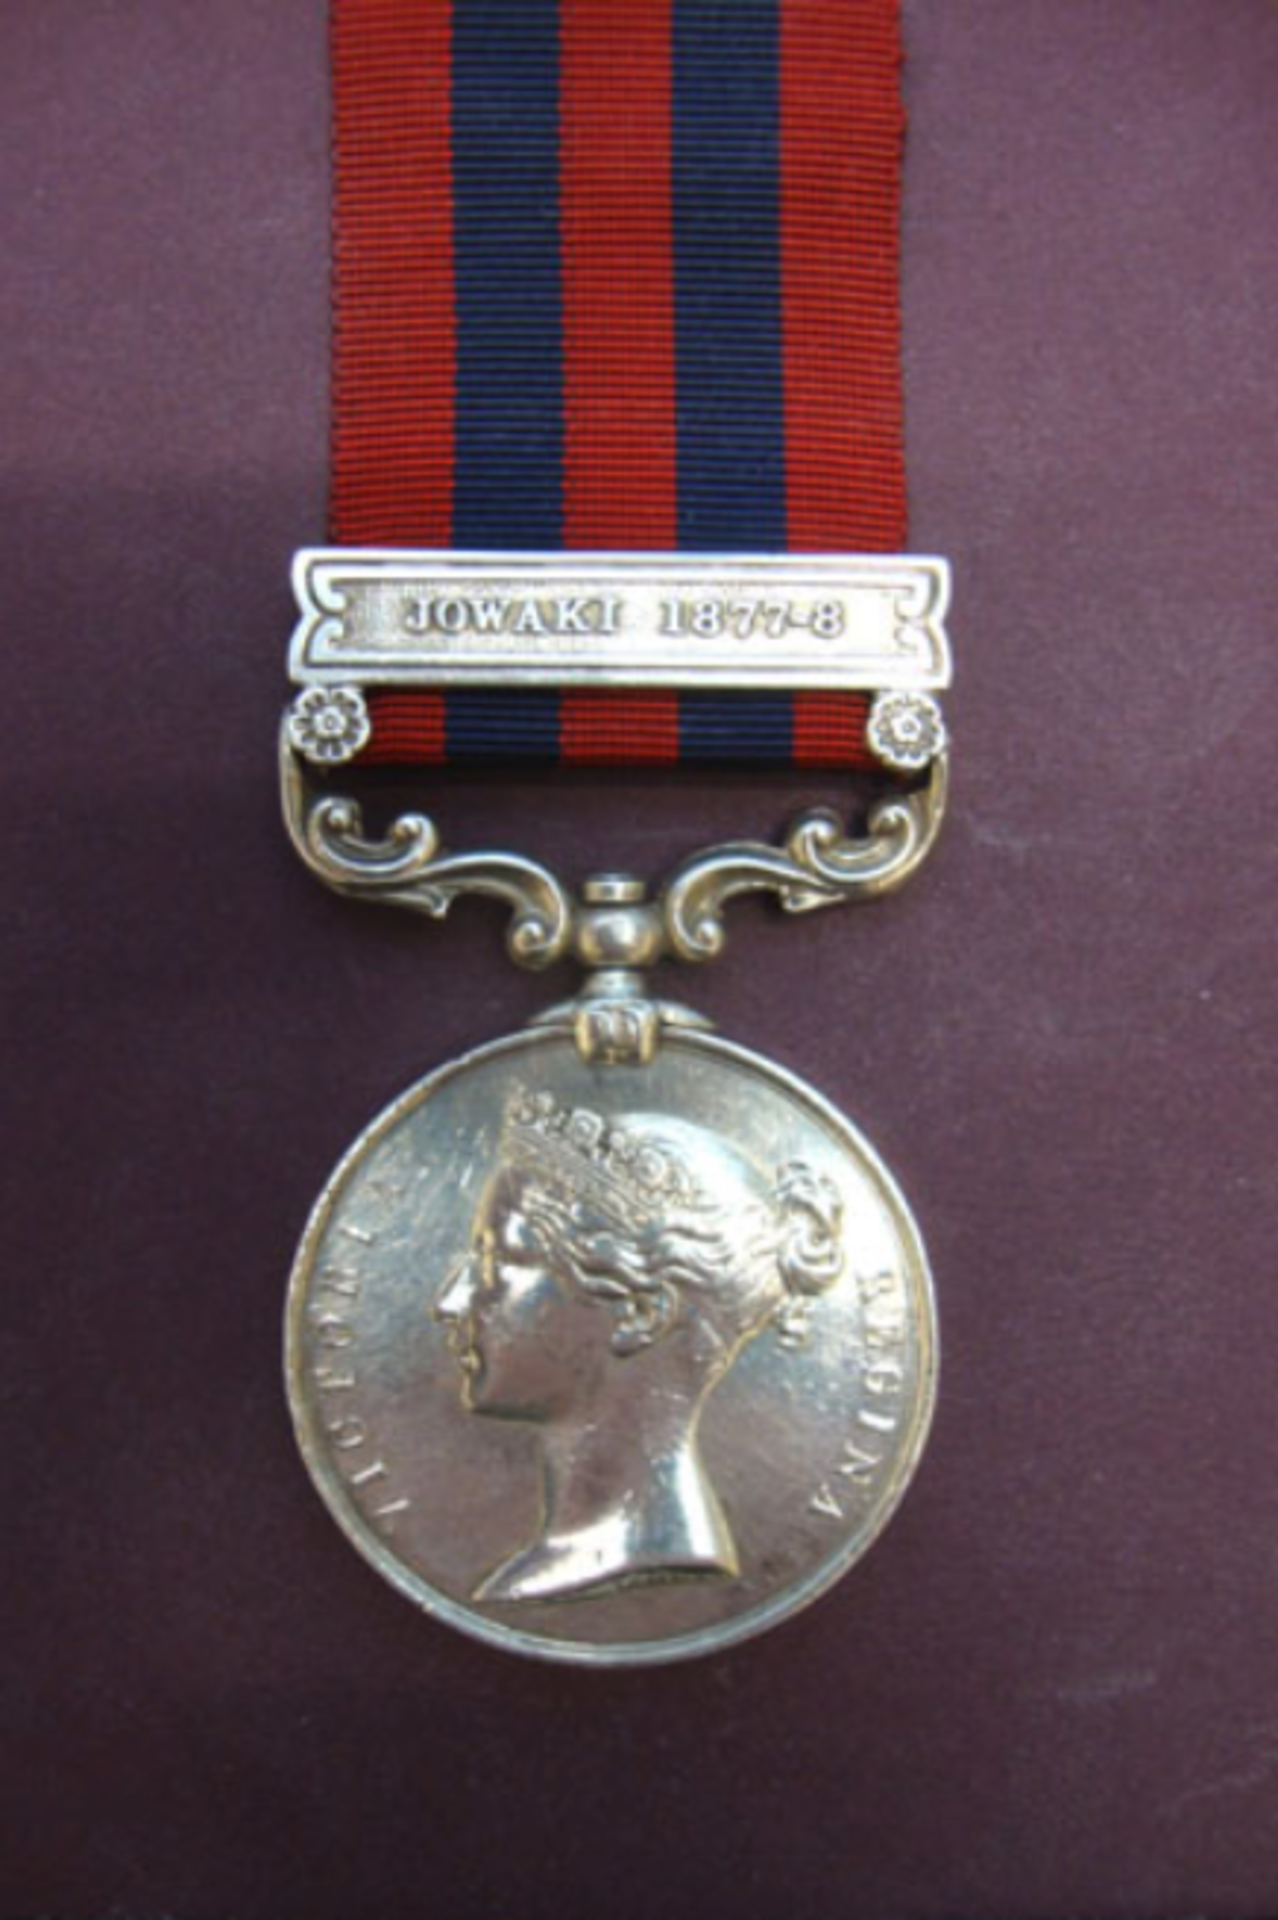 India General Service Medal With Jowaki 1877-8 Clasp To Nicholas Roads